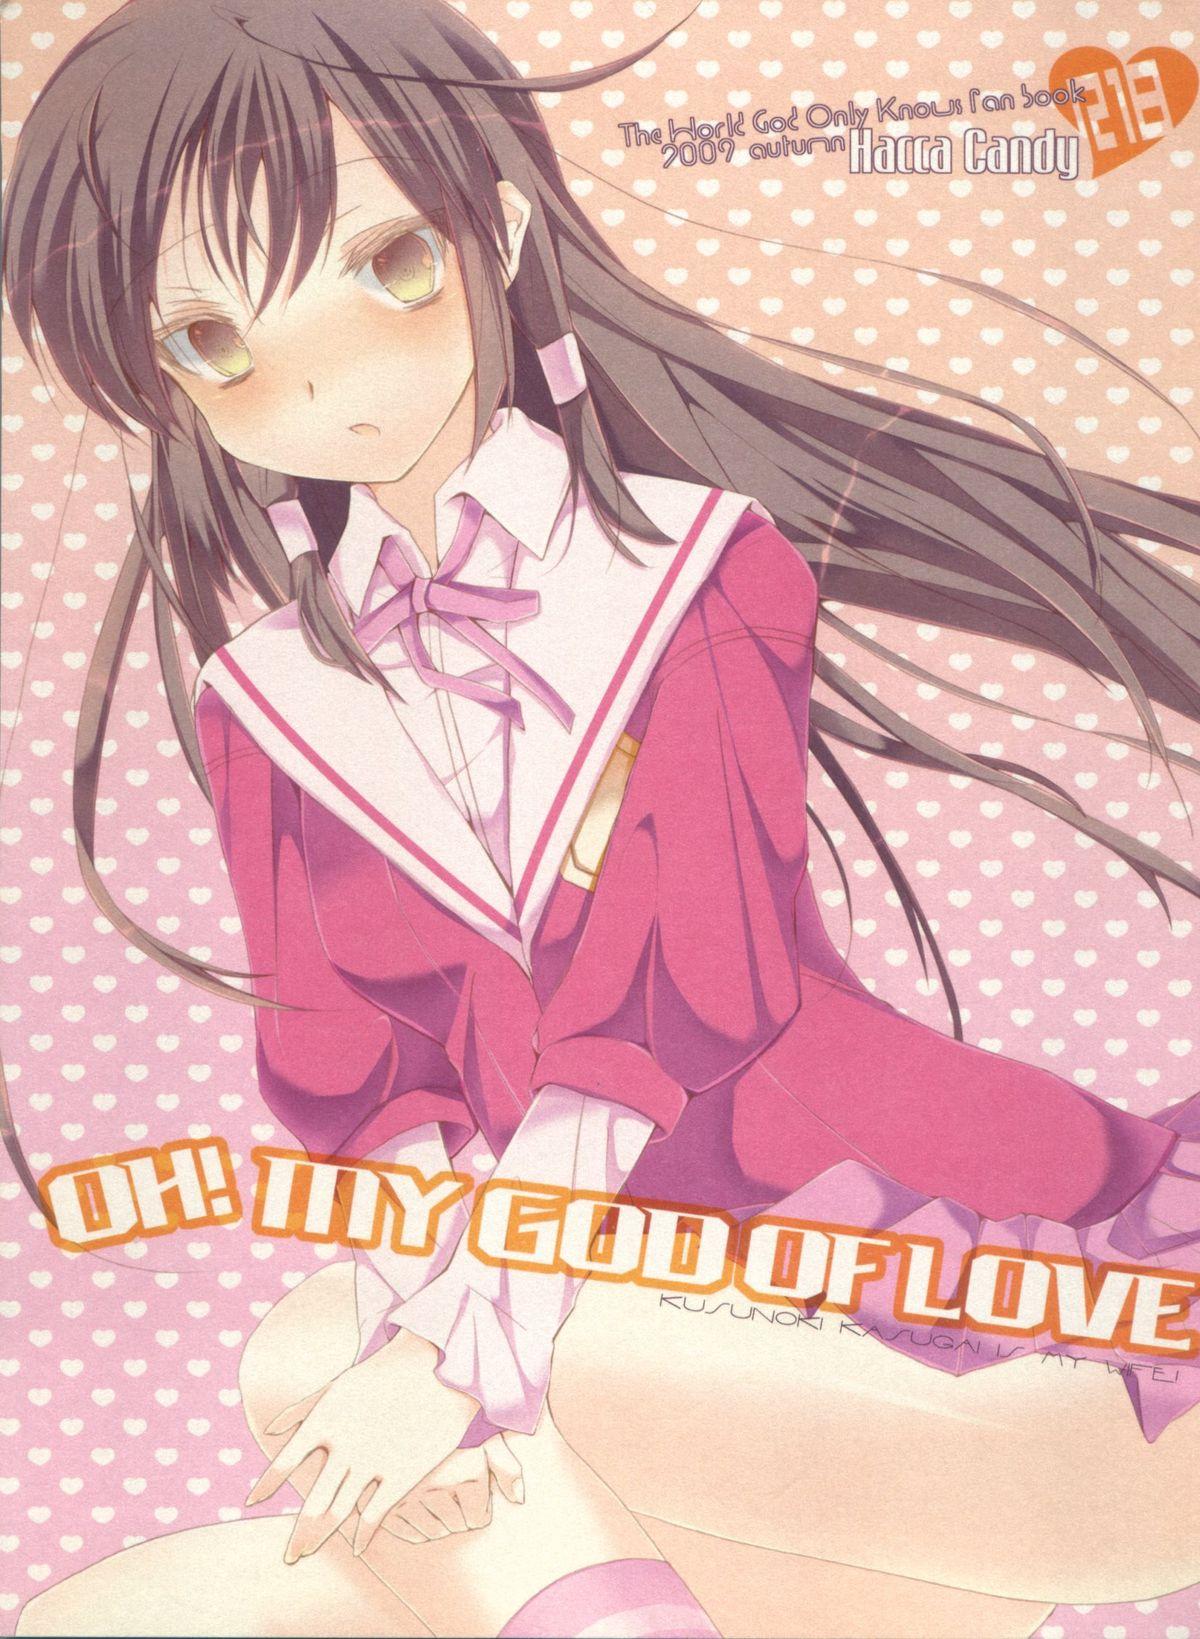 Stream OH!MY GOD OF LOVE - The world god only knows Mouth - Page 1